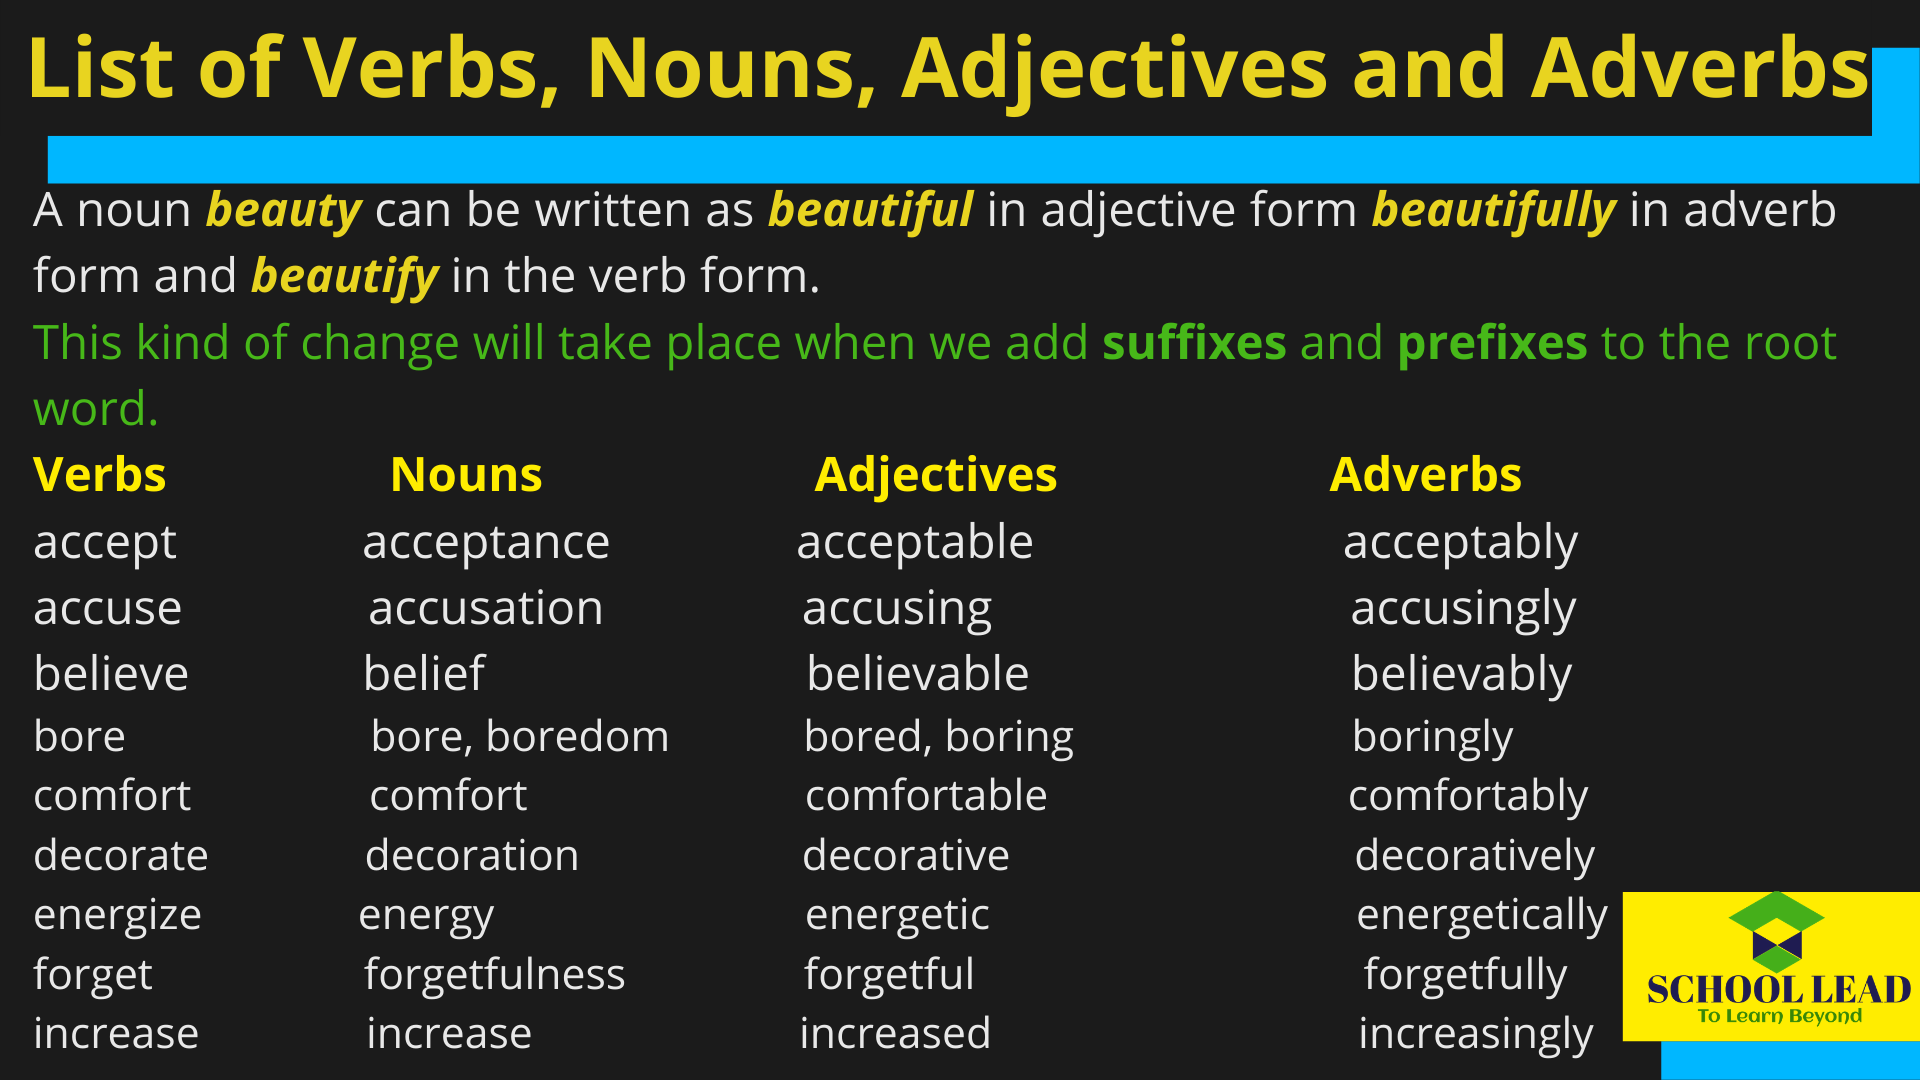 list-of-verbs-nouns-adjectives-and-adverbs-school-lead-list-of-verbs-nouns-adjectives